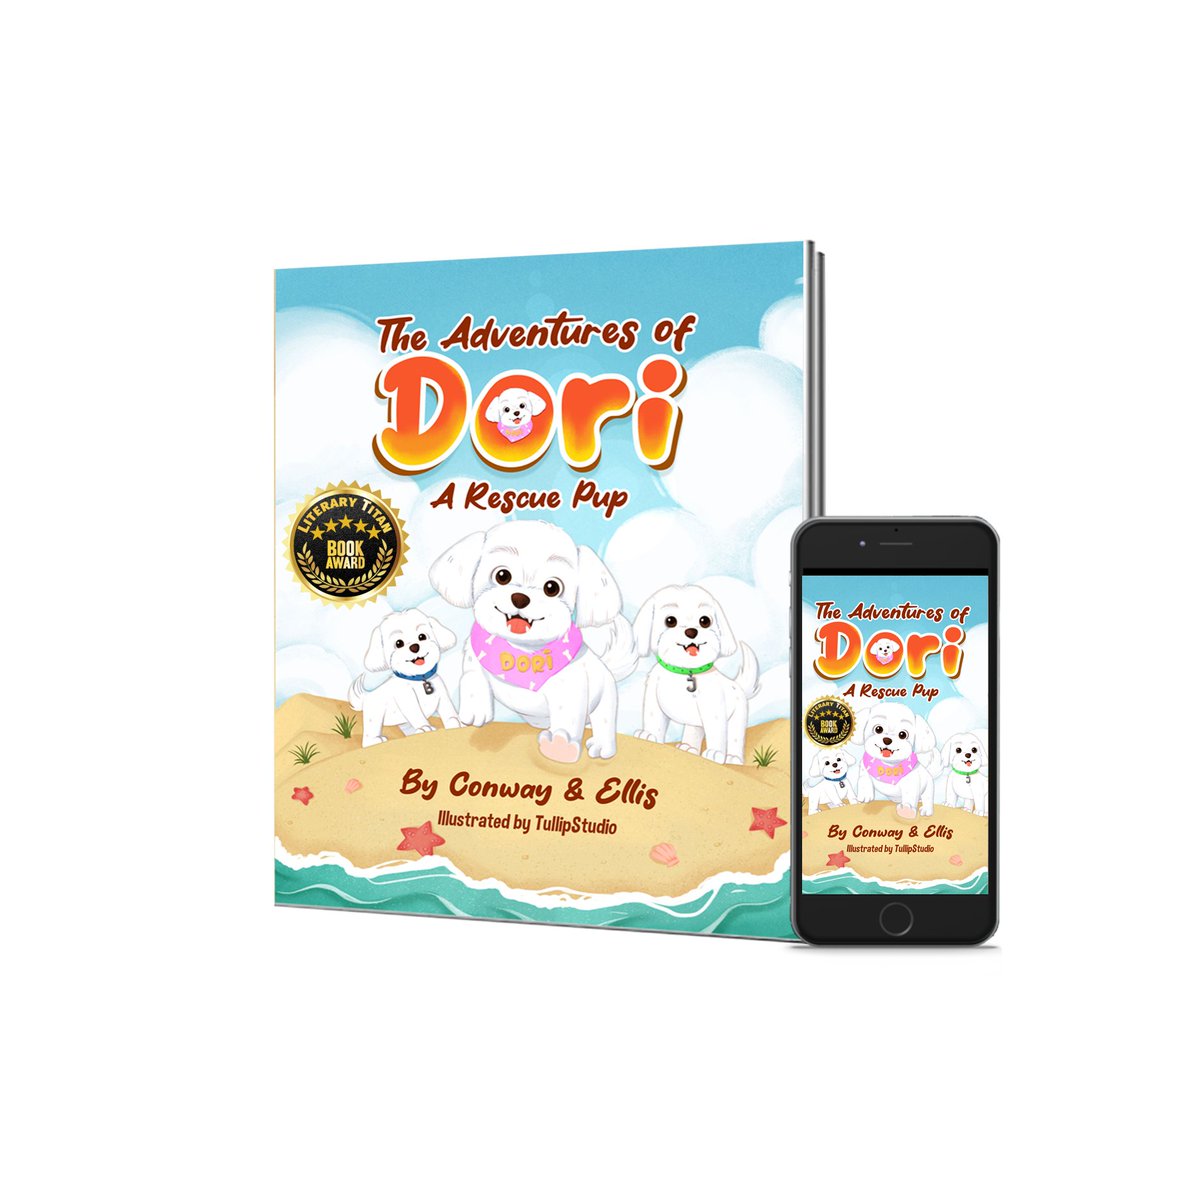 Follow rescue pup Dori on a beach adventure filled with courage and determination as she faces challenges, makes new friends, and discovers the true meaning of heroism. bit.ly/3IB5yN6 #rescue #makingfriends